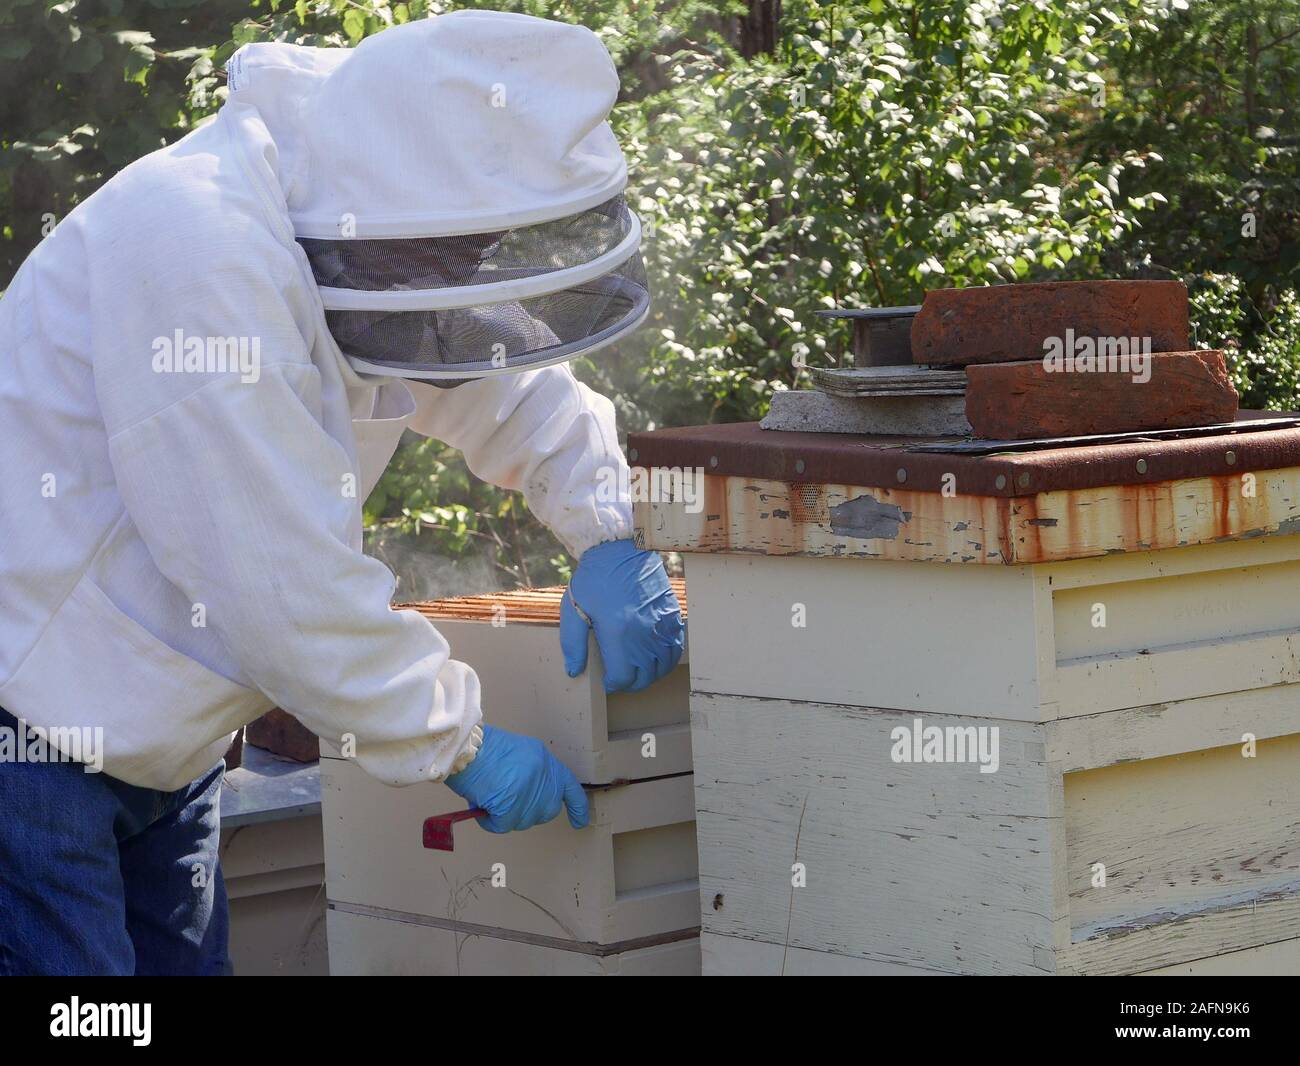 A Beekeeper in a beekeepers suit with headgear opening up a hive and separating a brood box wearing rubber gloves Stock Photo